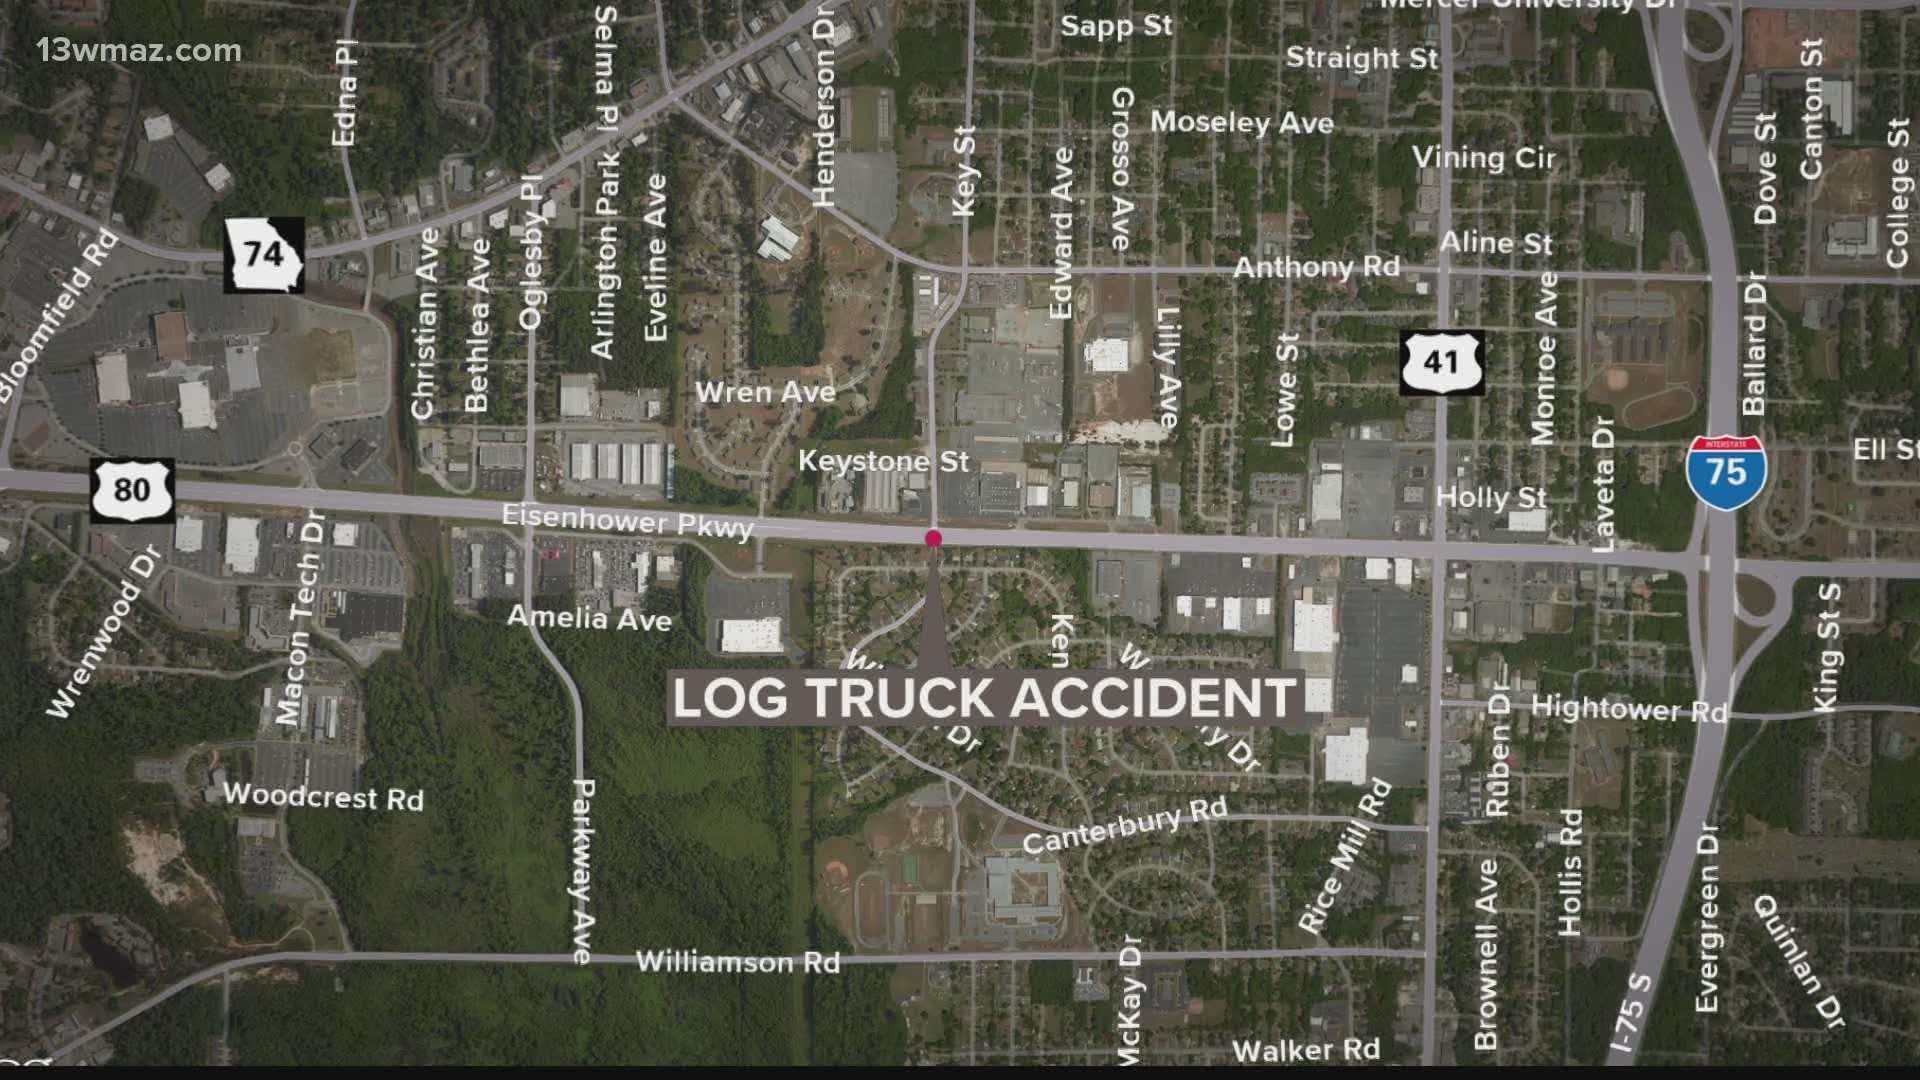 A 36-year-old man is in critical condition after crashing into the back of a log truck Tuesday morning.